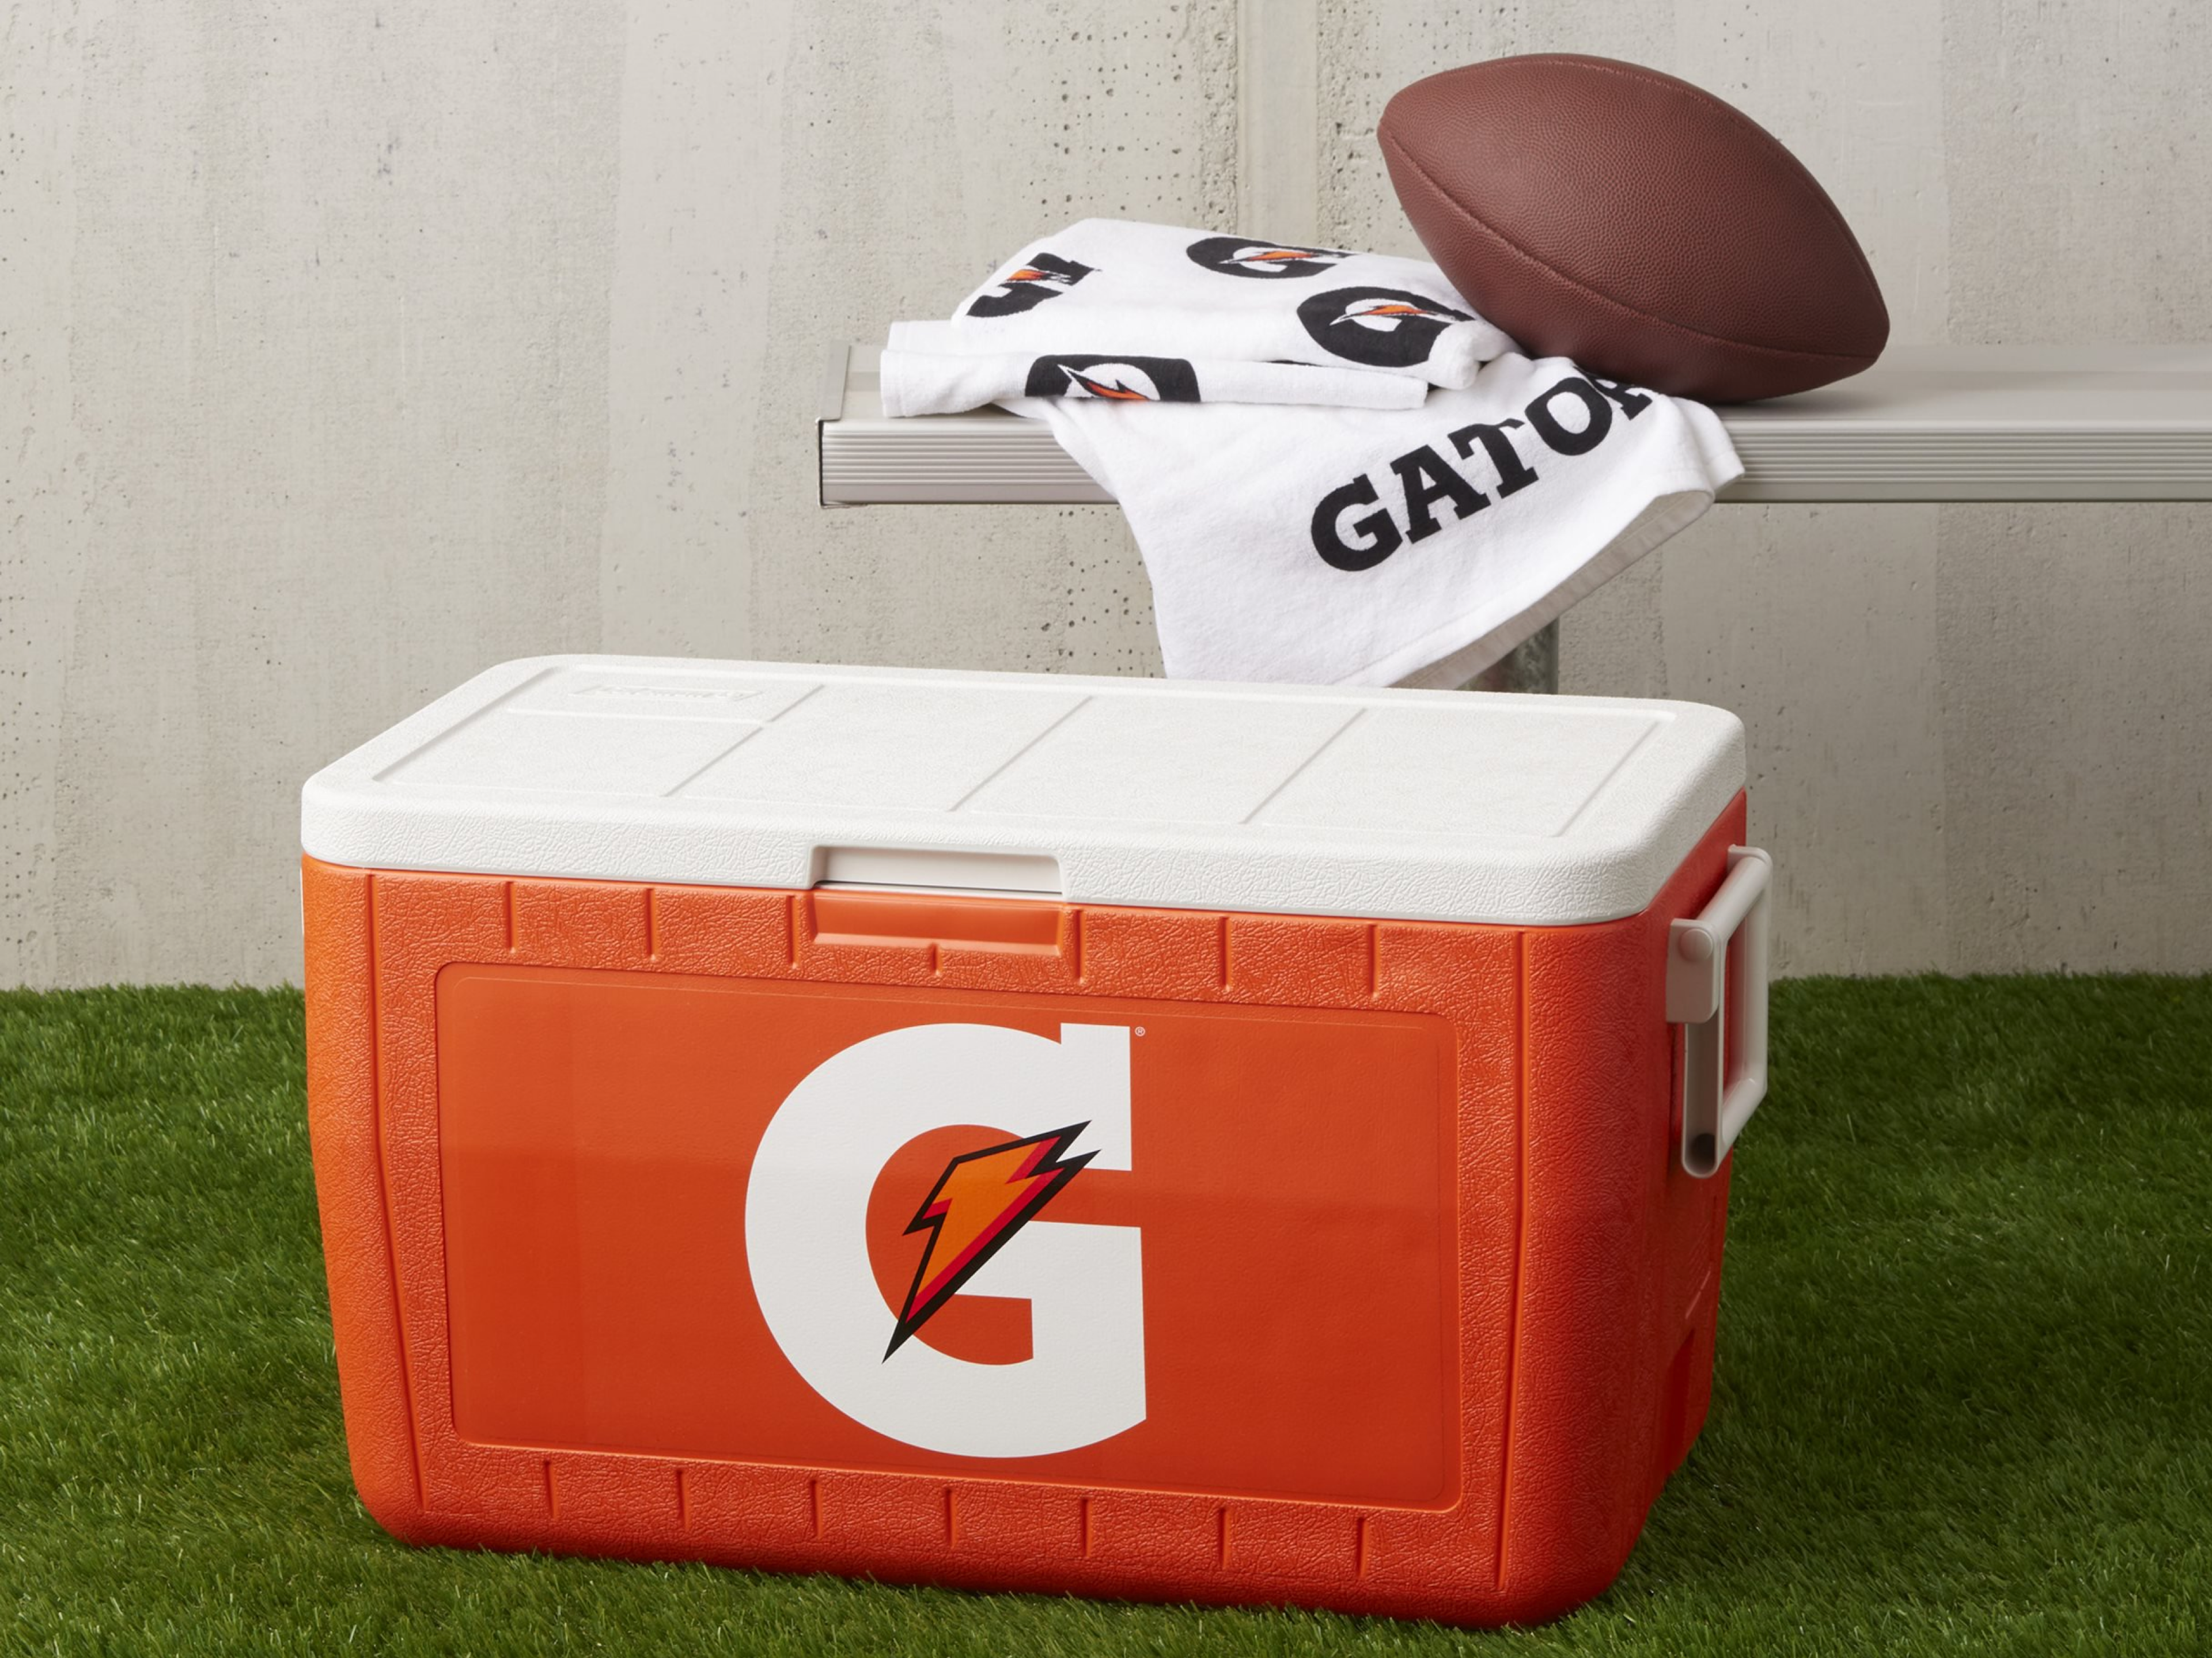 Gatorade Ice Chest on turf next to a bench with a towel and football